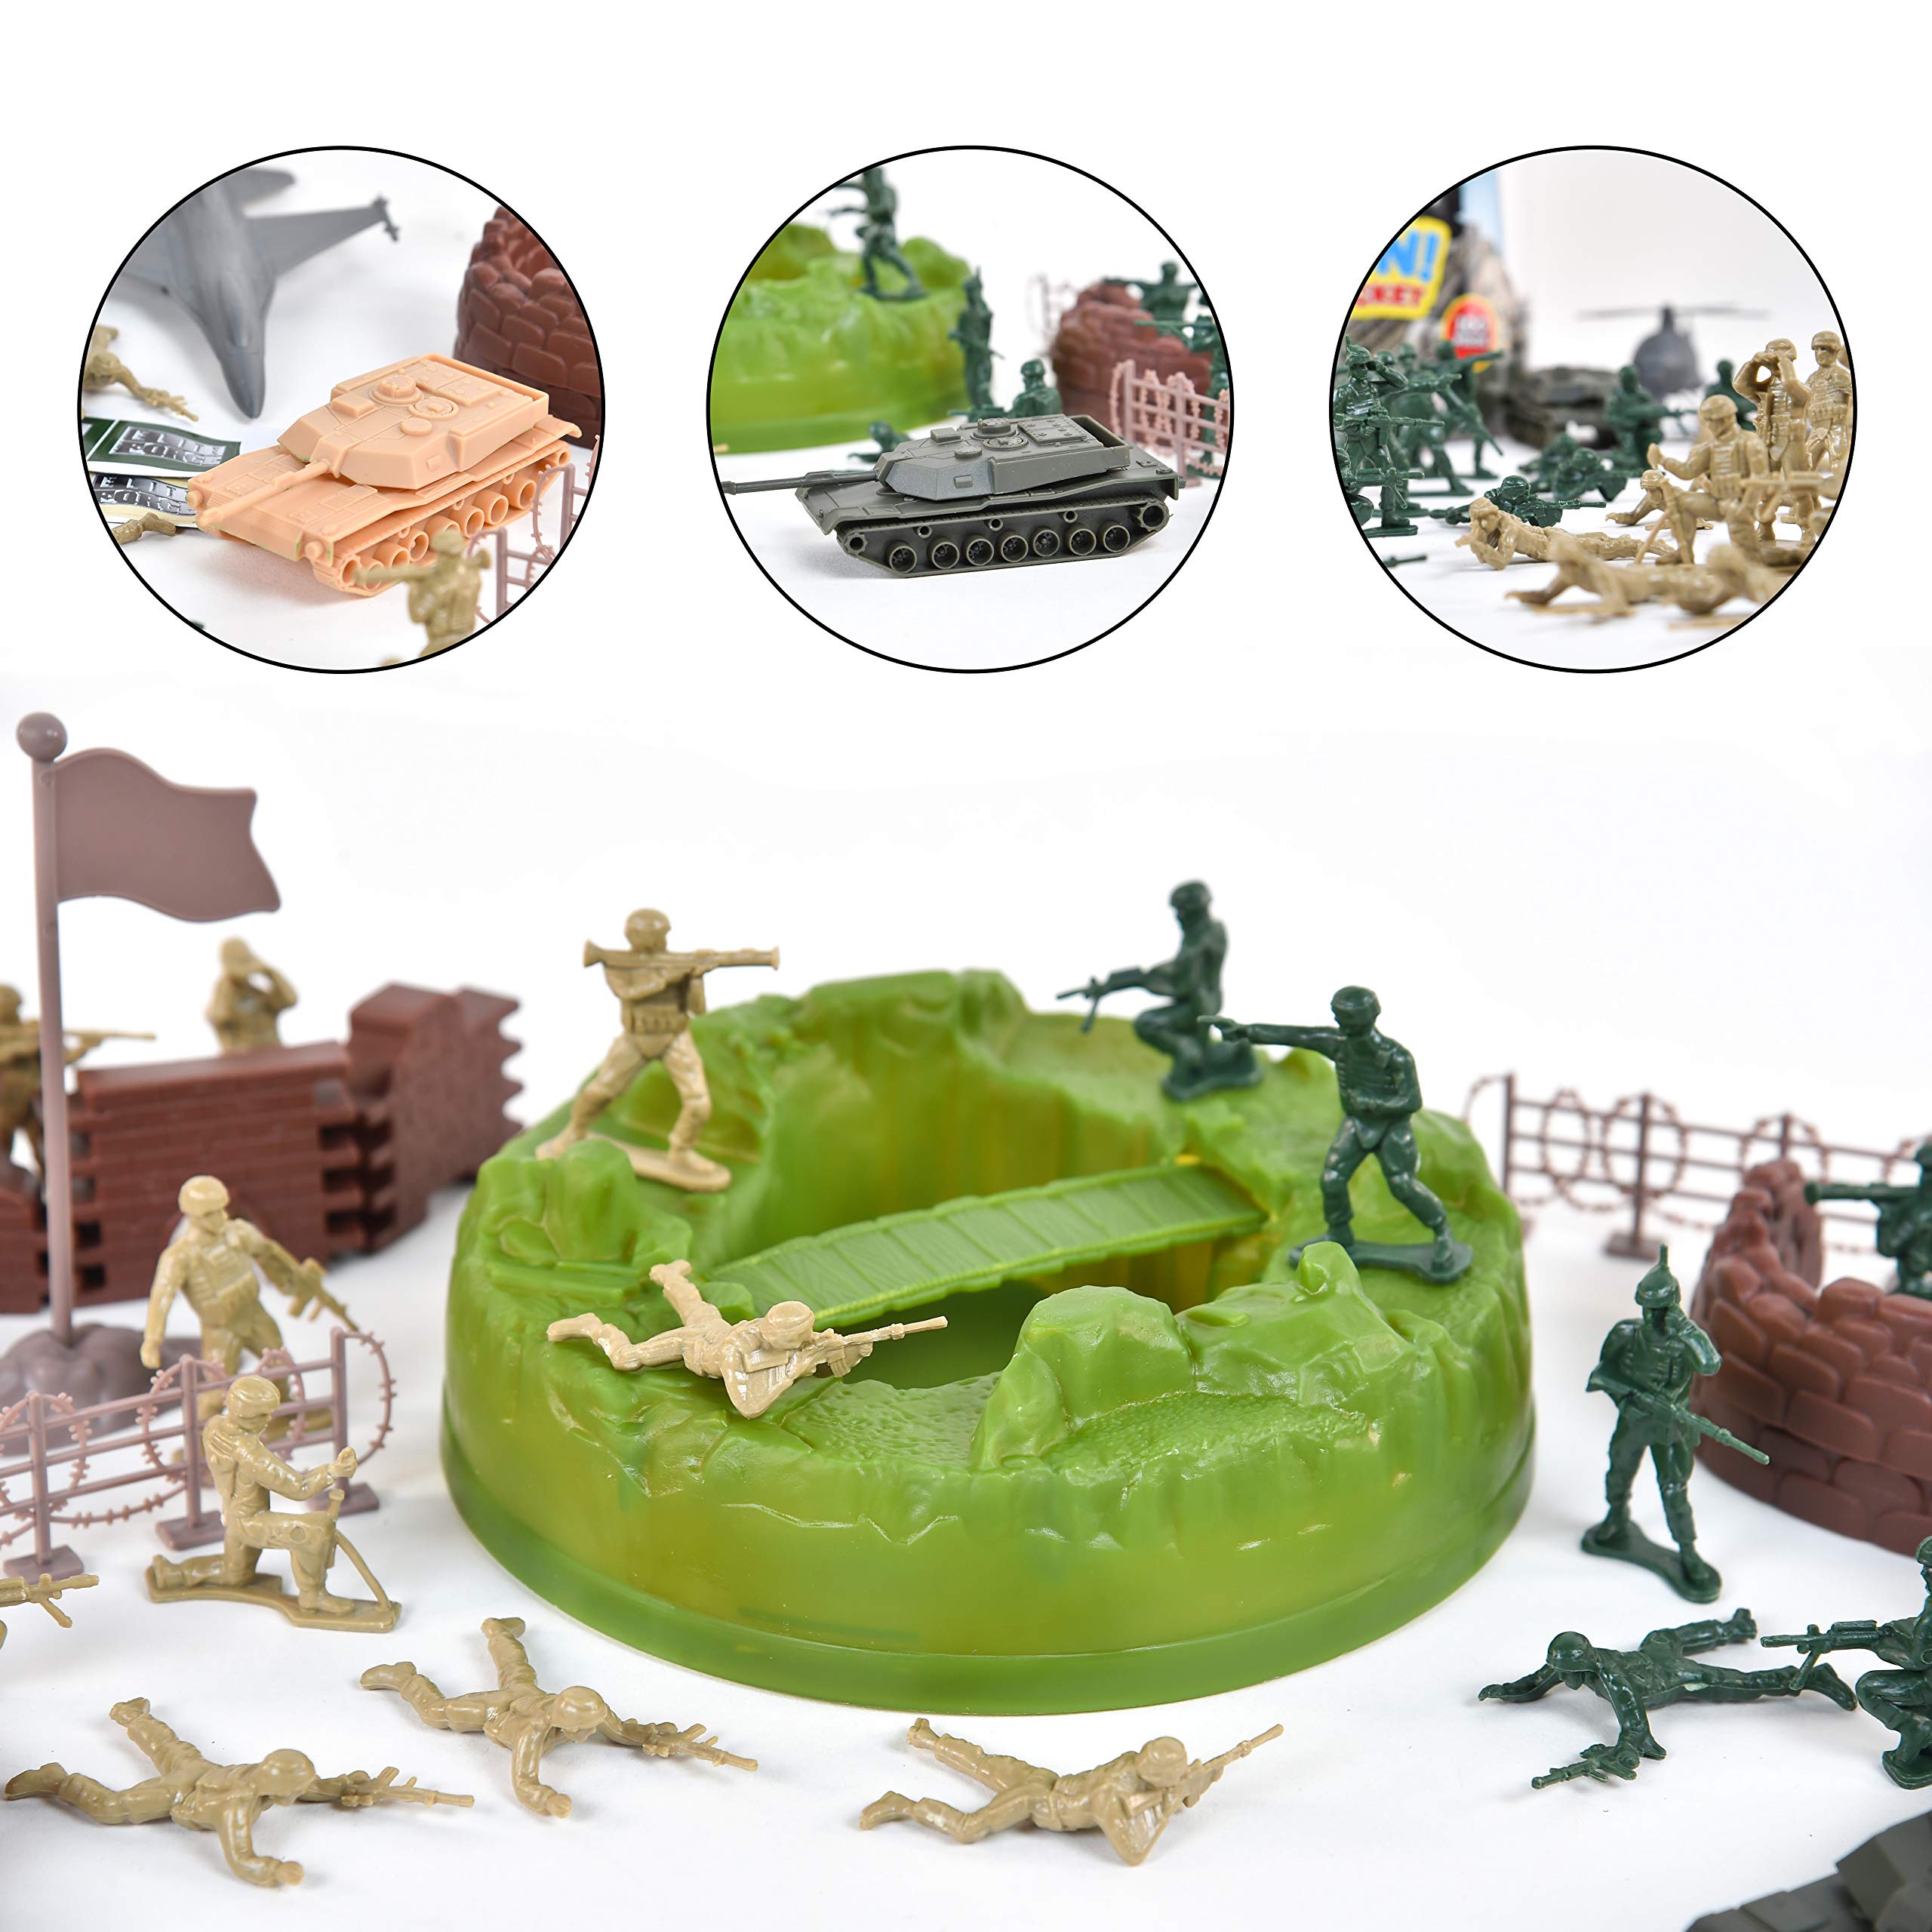 Sunny Days Entertainment Military Battle Group Bucket – 100 Assorted Soldiers and Accessories Toy Play Set for Kids, Boys and Girls | Plastic Army Men Figures with Storage Container